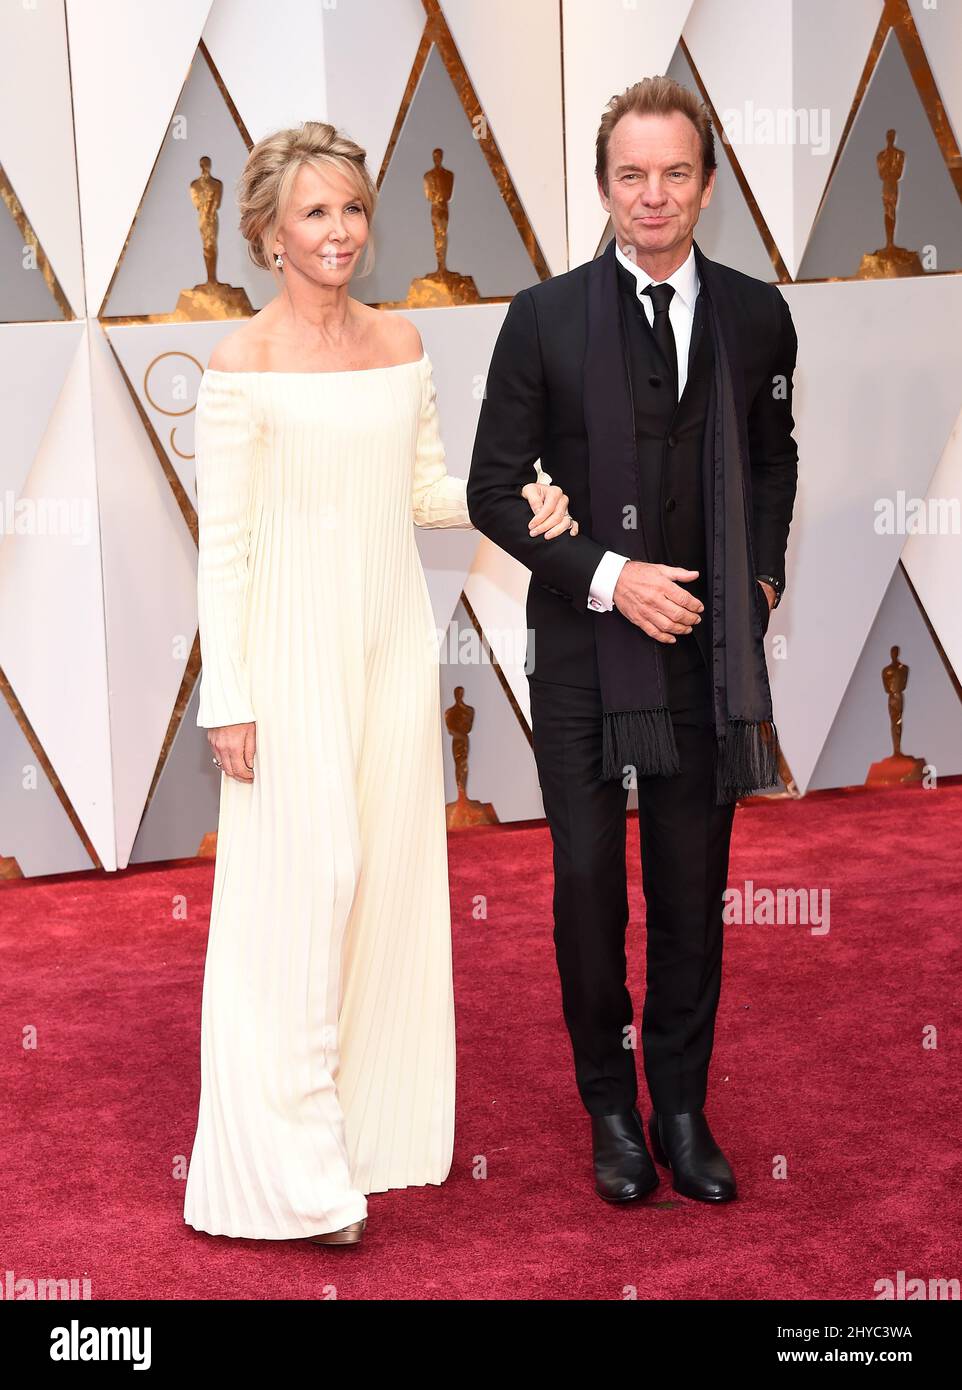 Sting, Trudie Styler at the 89th Academy Awards held at the Dolby Theatre Stock Photo